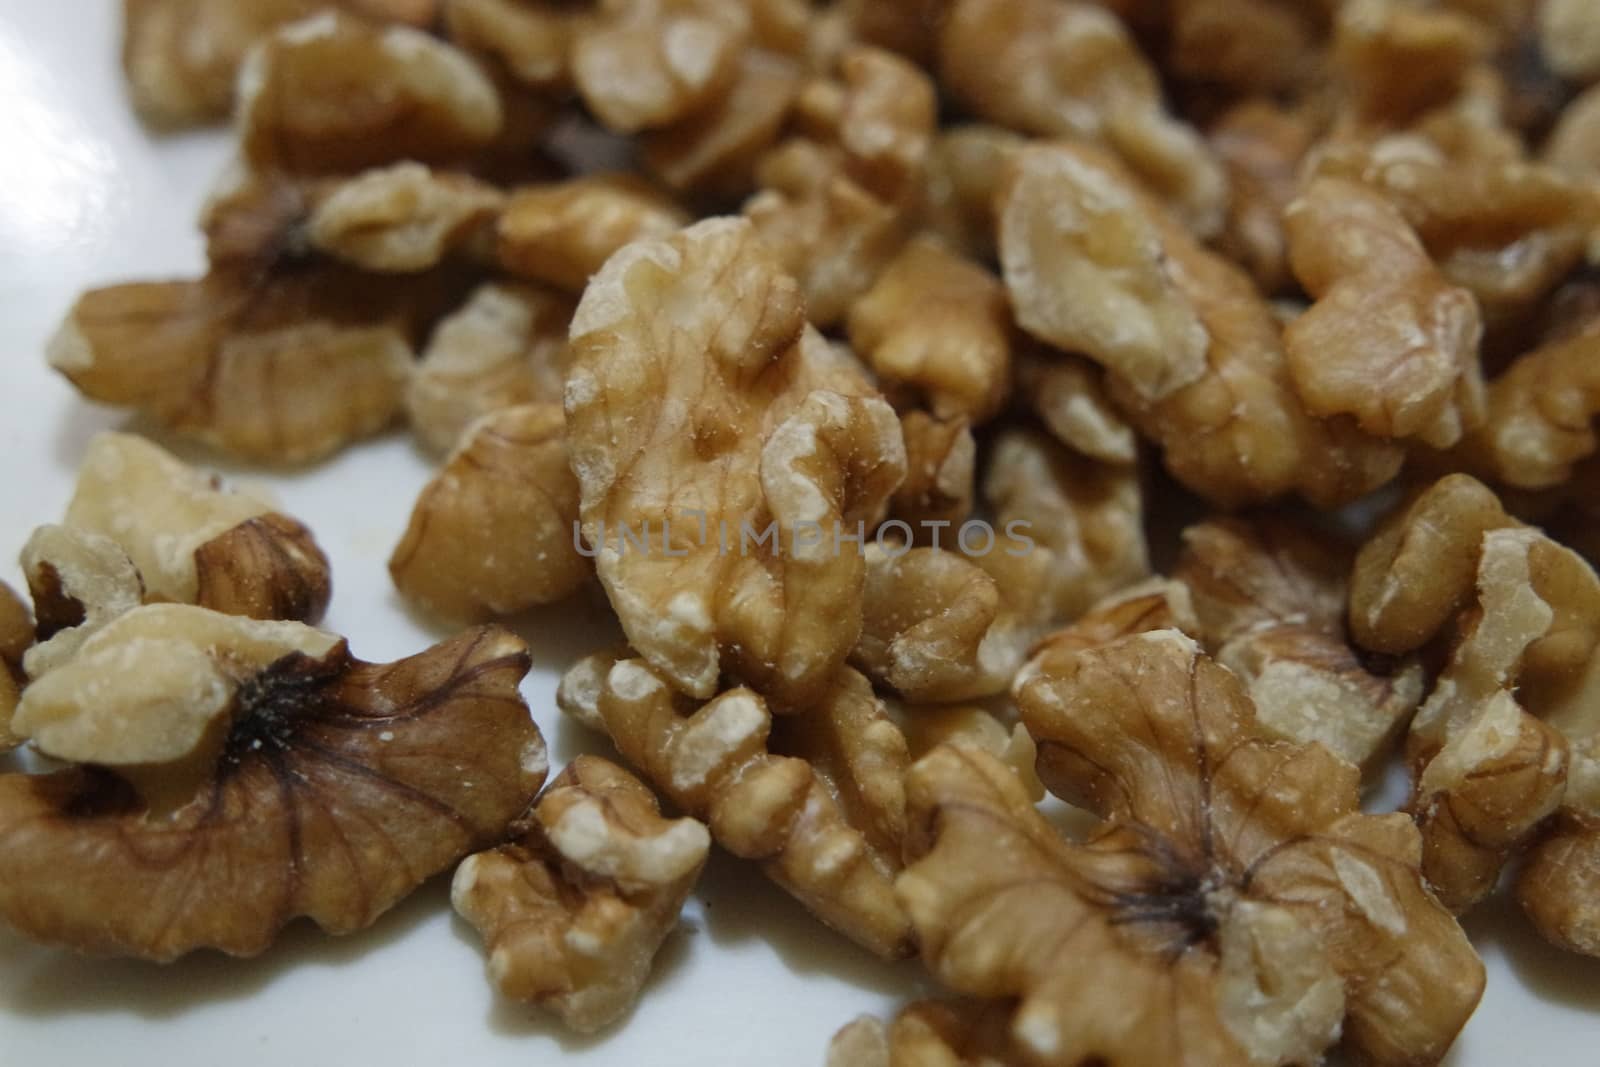 Close-up top view of peeled walnut on a white background. peeled walnut without shell ready to eat dry fruit.